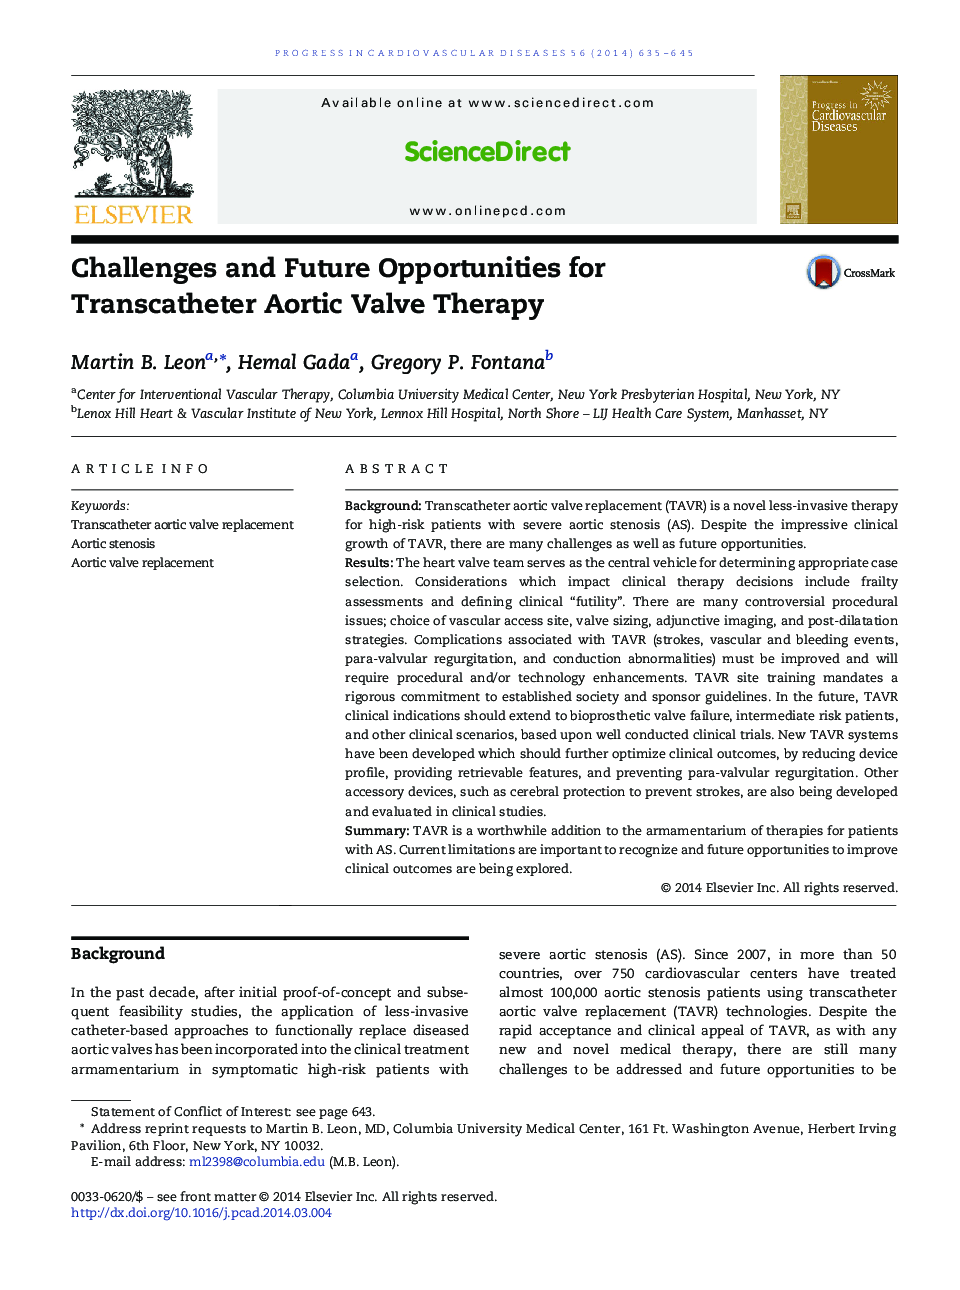 Challenges and Future Opportunities for Transcatheter Aortic Valve Therapy 